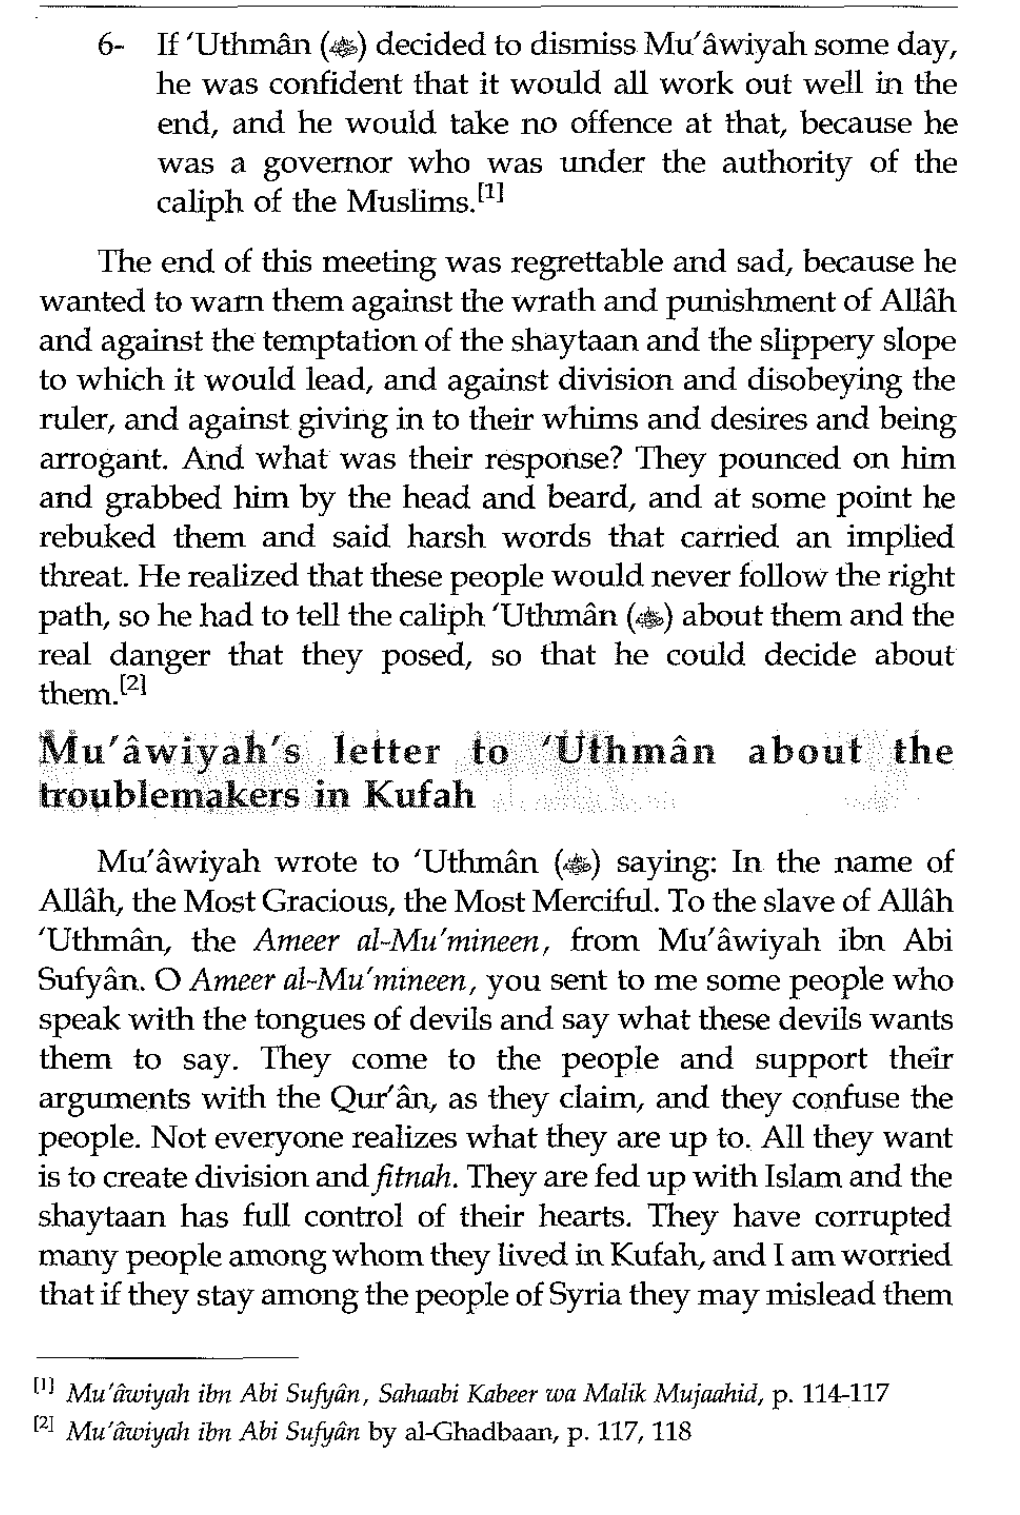 Mu'swiyahls Letter Bropblemakers in Kufa Mu'iwiyah Wrote to 'Uthmin (A)Saying: in the Name of Ajlih, the Most Gracious, the Most Merciful